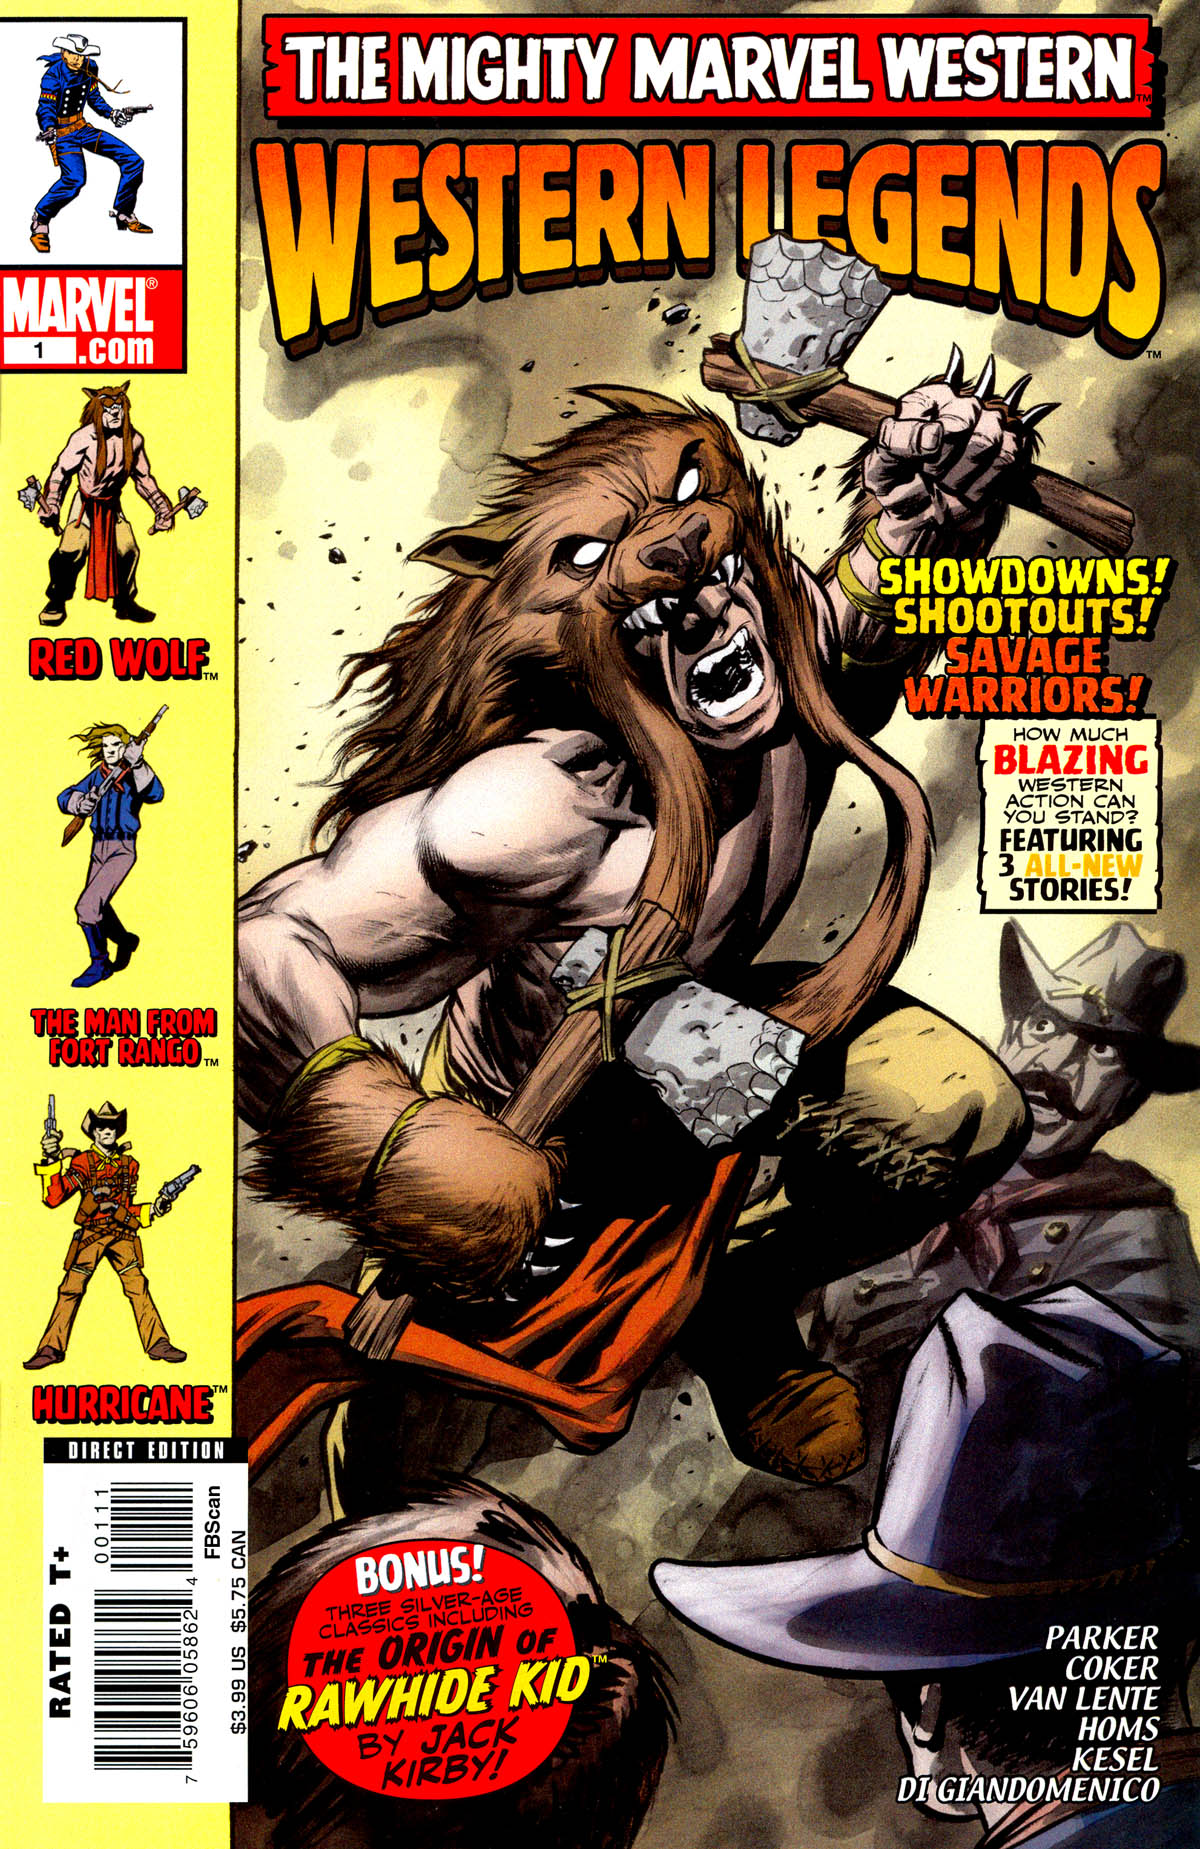 Read online Marvel Westerns: Outlaw Files comic -  Issue #Marvel Westerns Western Legends - 1